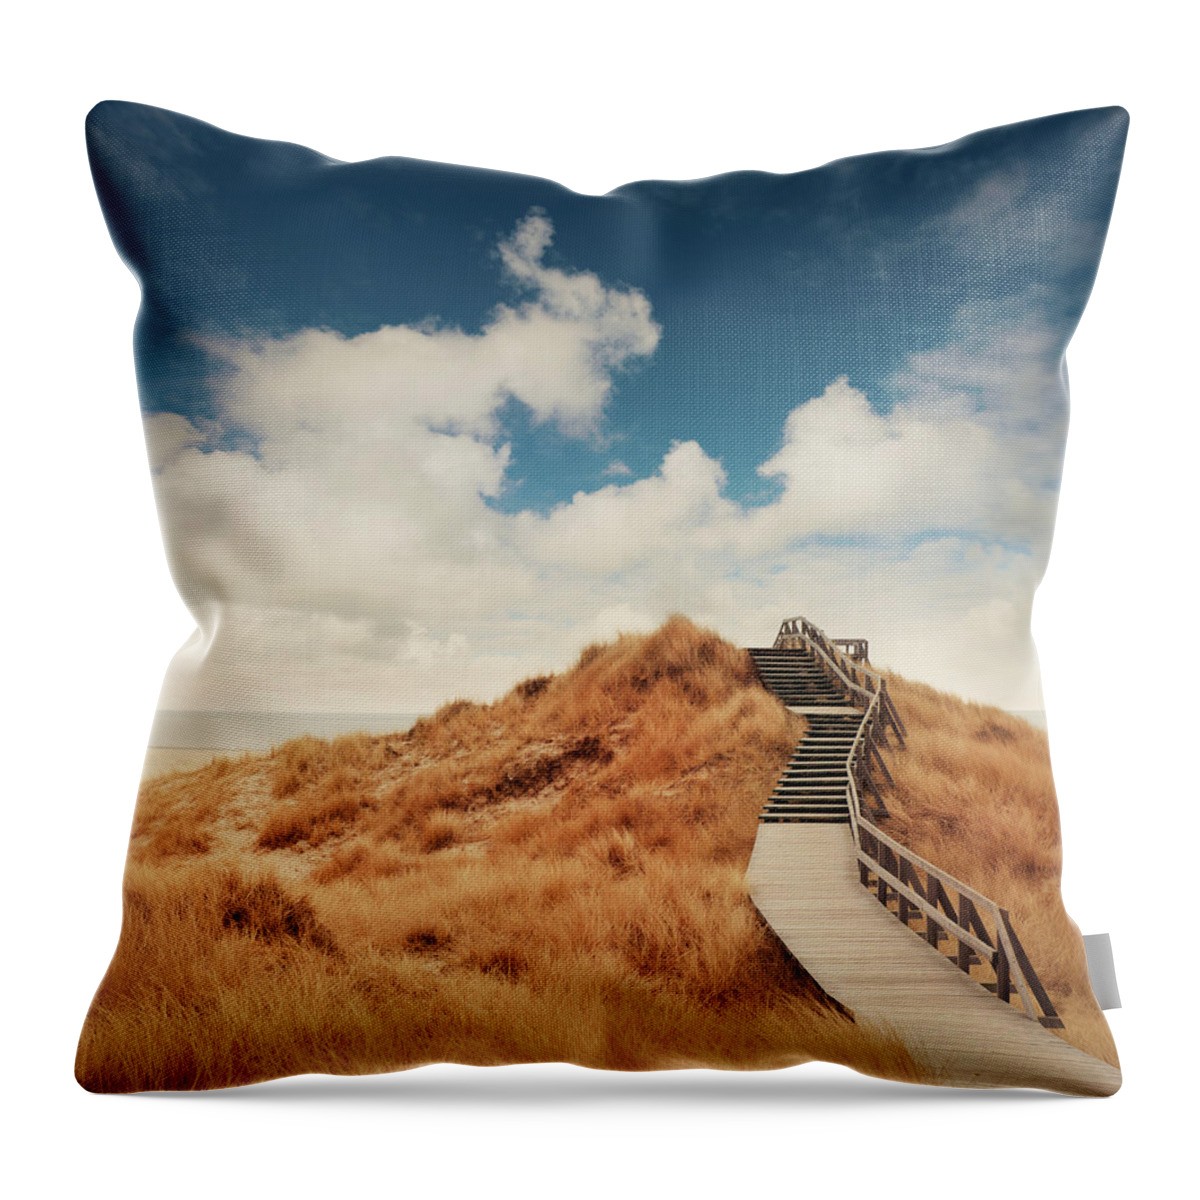 Grass Family Throw Pillow featuring the photograph Way Through The Dunes #3 by Ppampicture